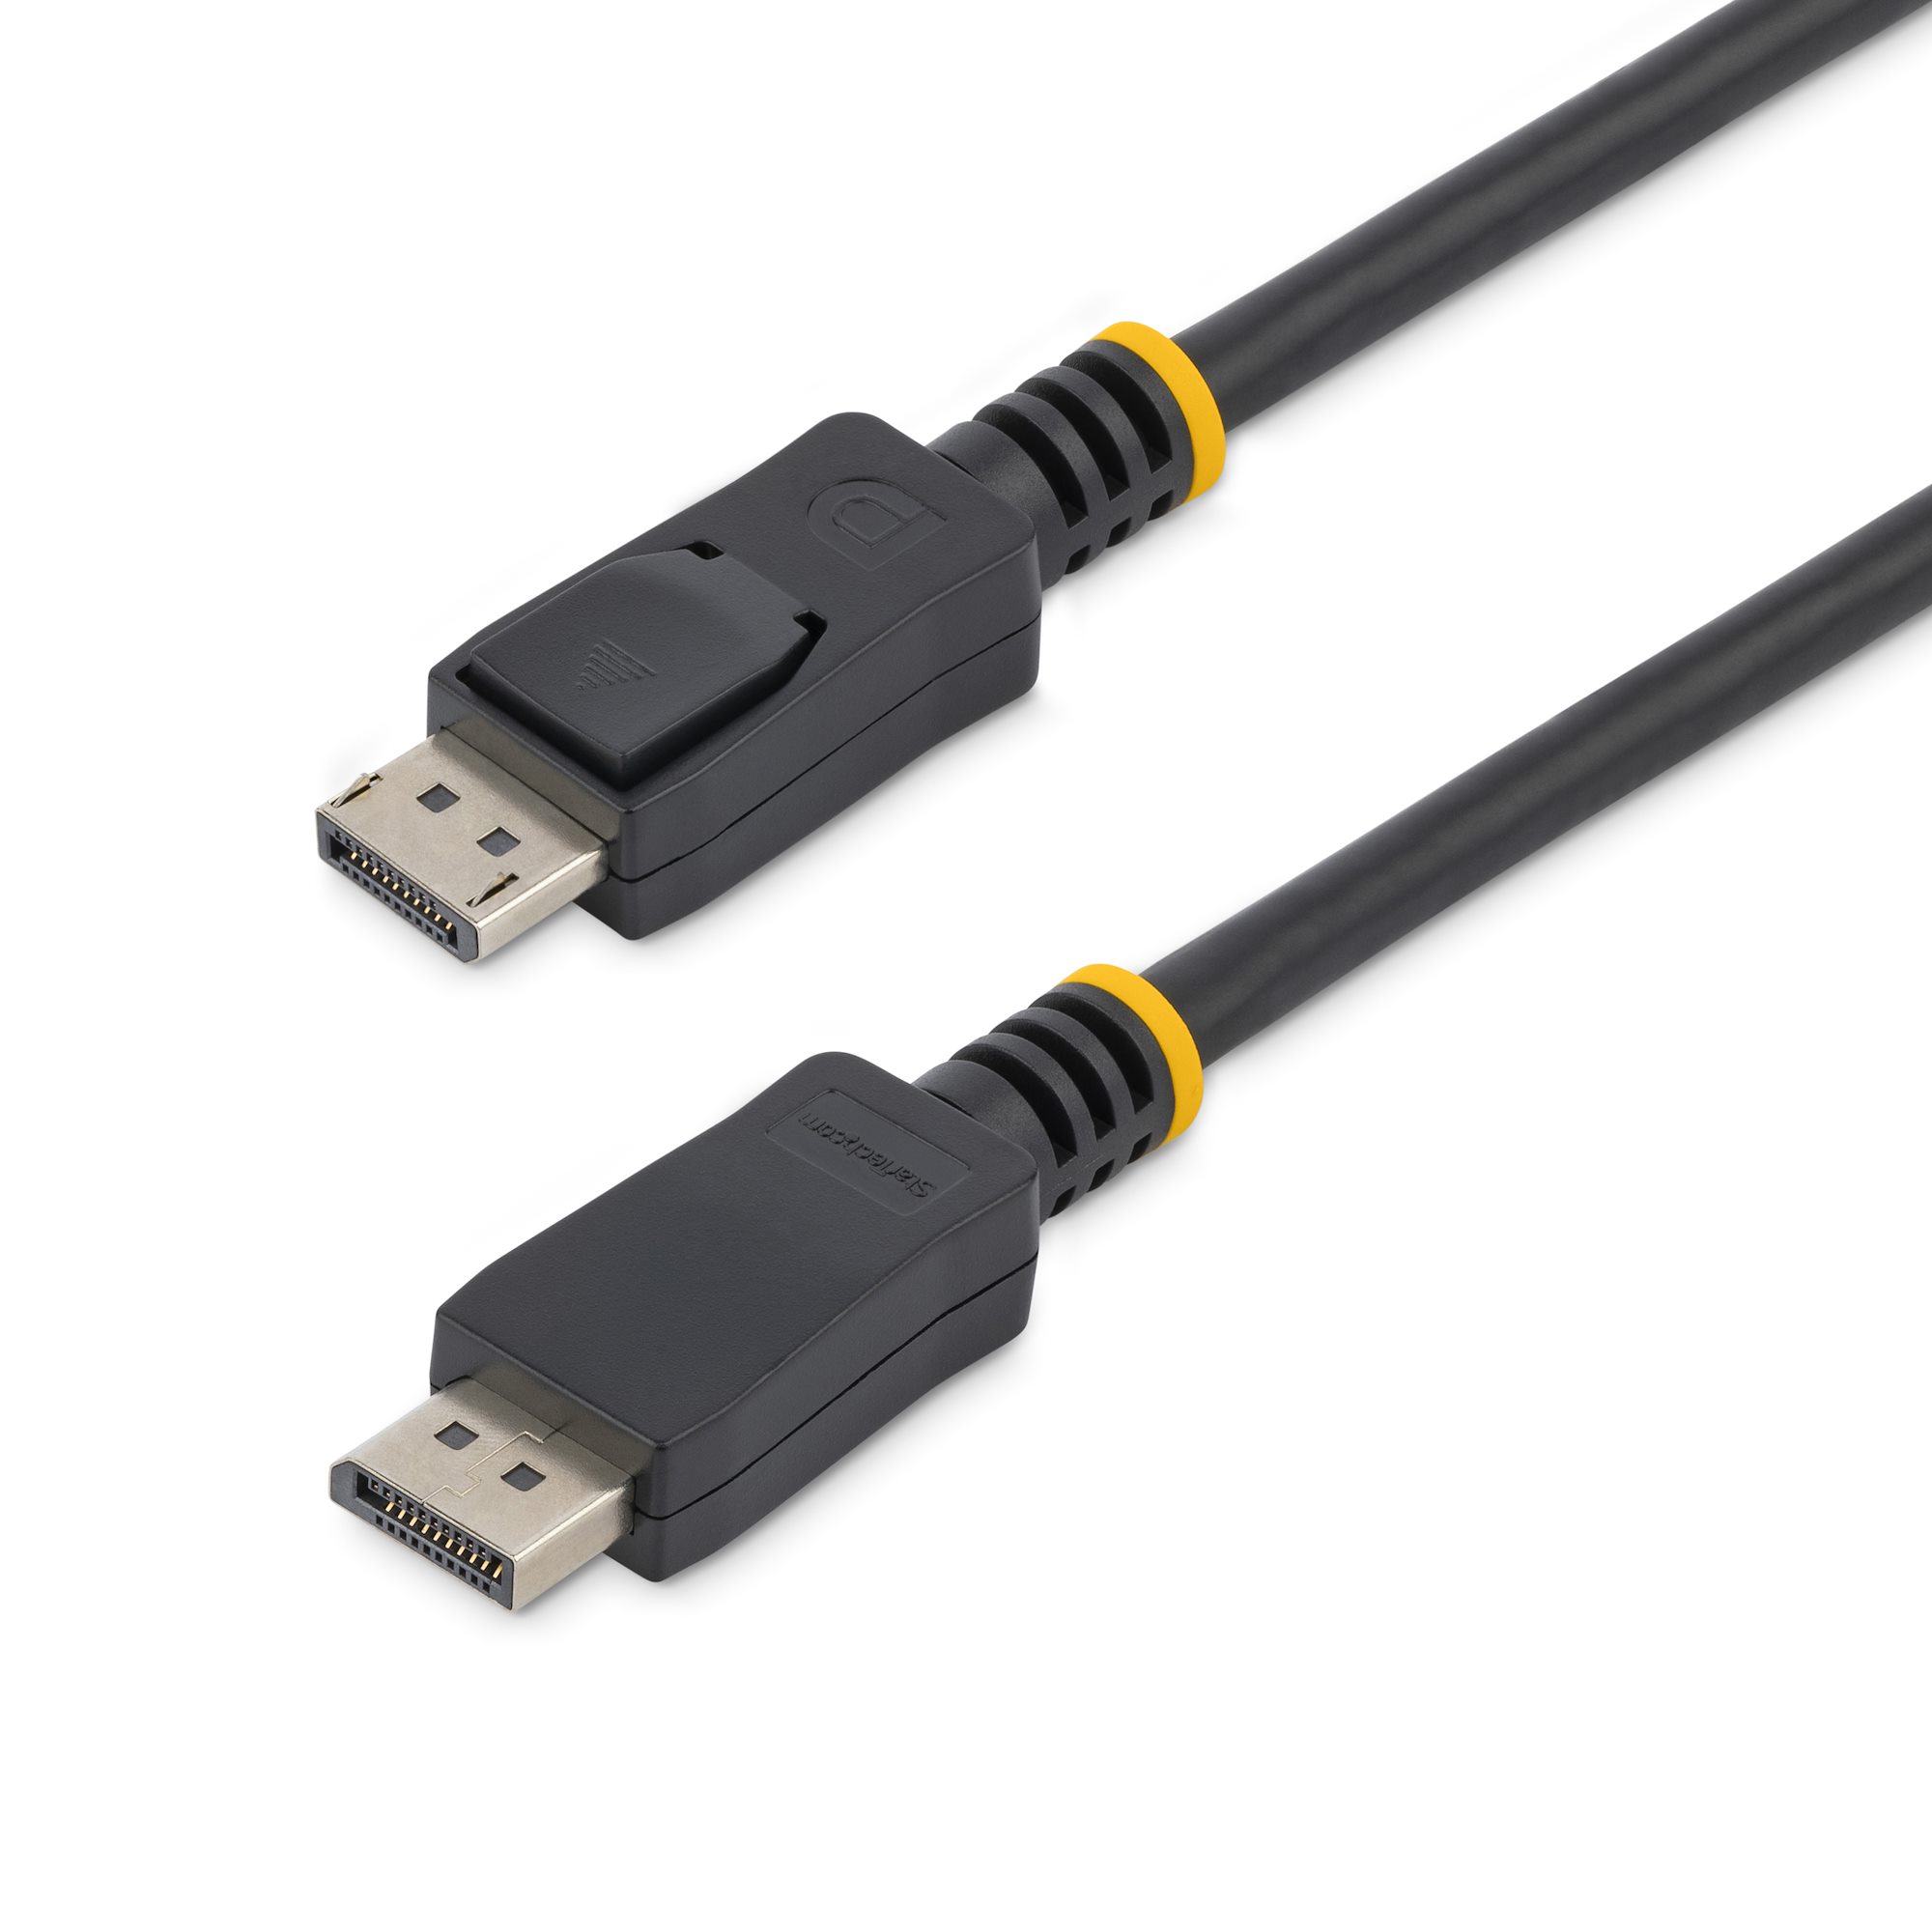 15FT Feet 5M Meter VGA Male to Male Cable Cord for Computer PC Monitor 